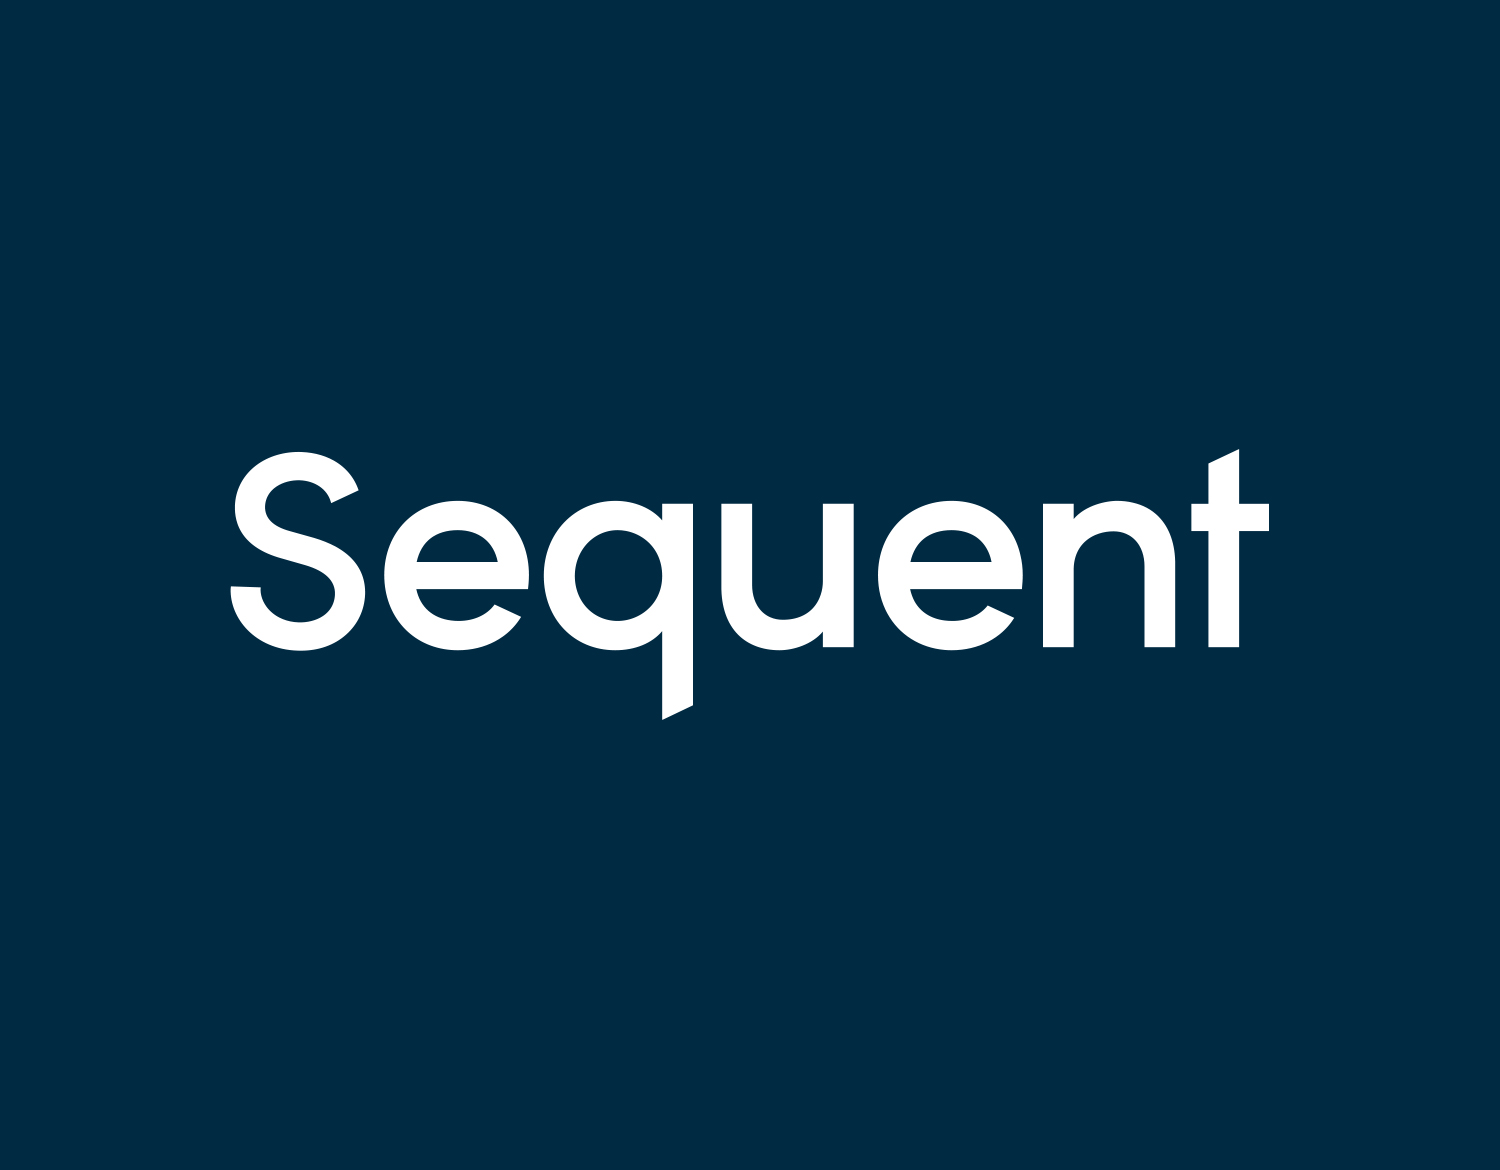 Sequent - Prepared for change